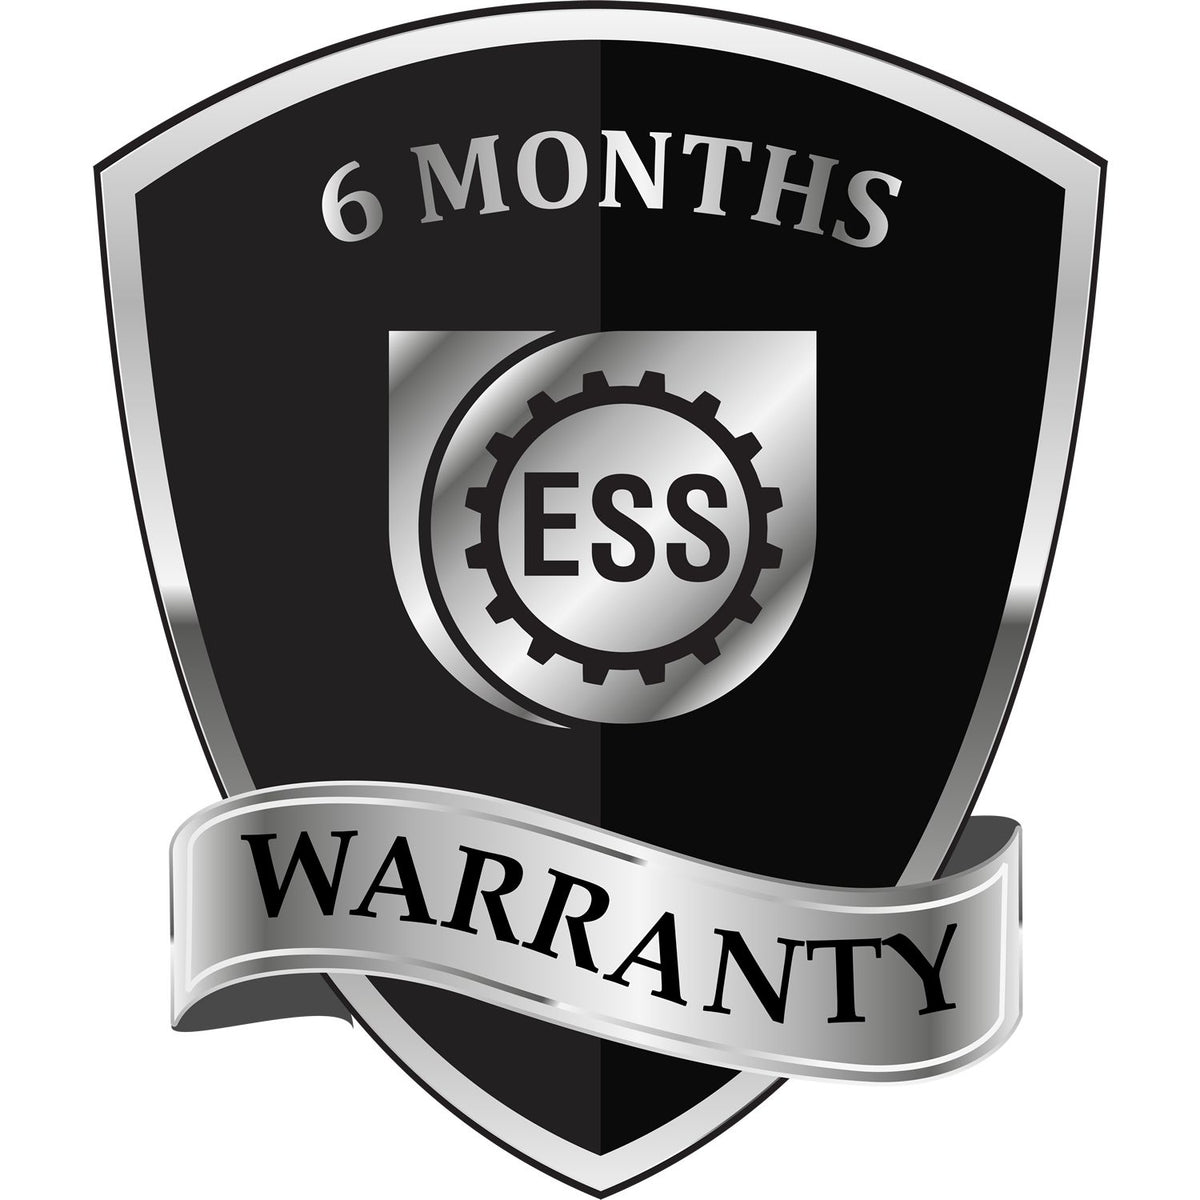 A badge or emblem showing a warranty icon for the Iowa Professional Engineer Seal Stamp